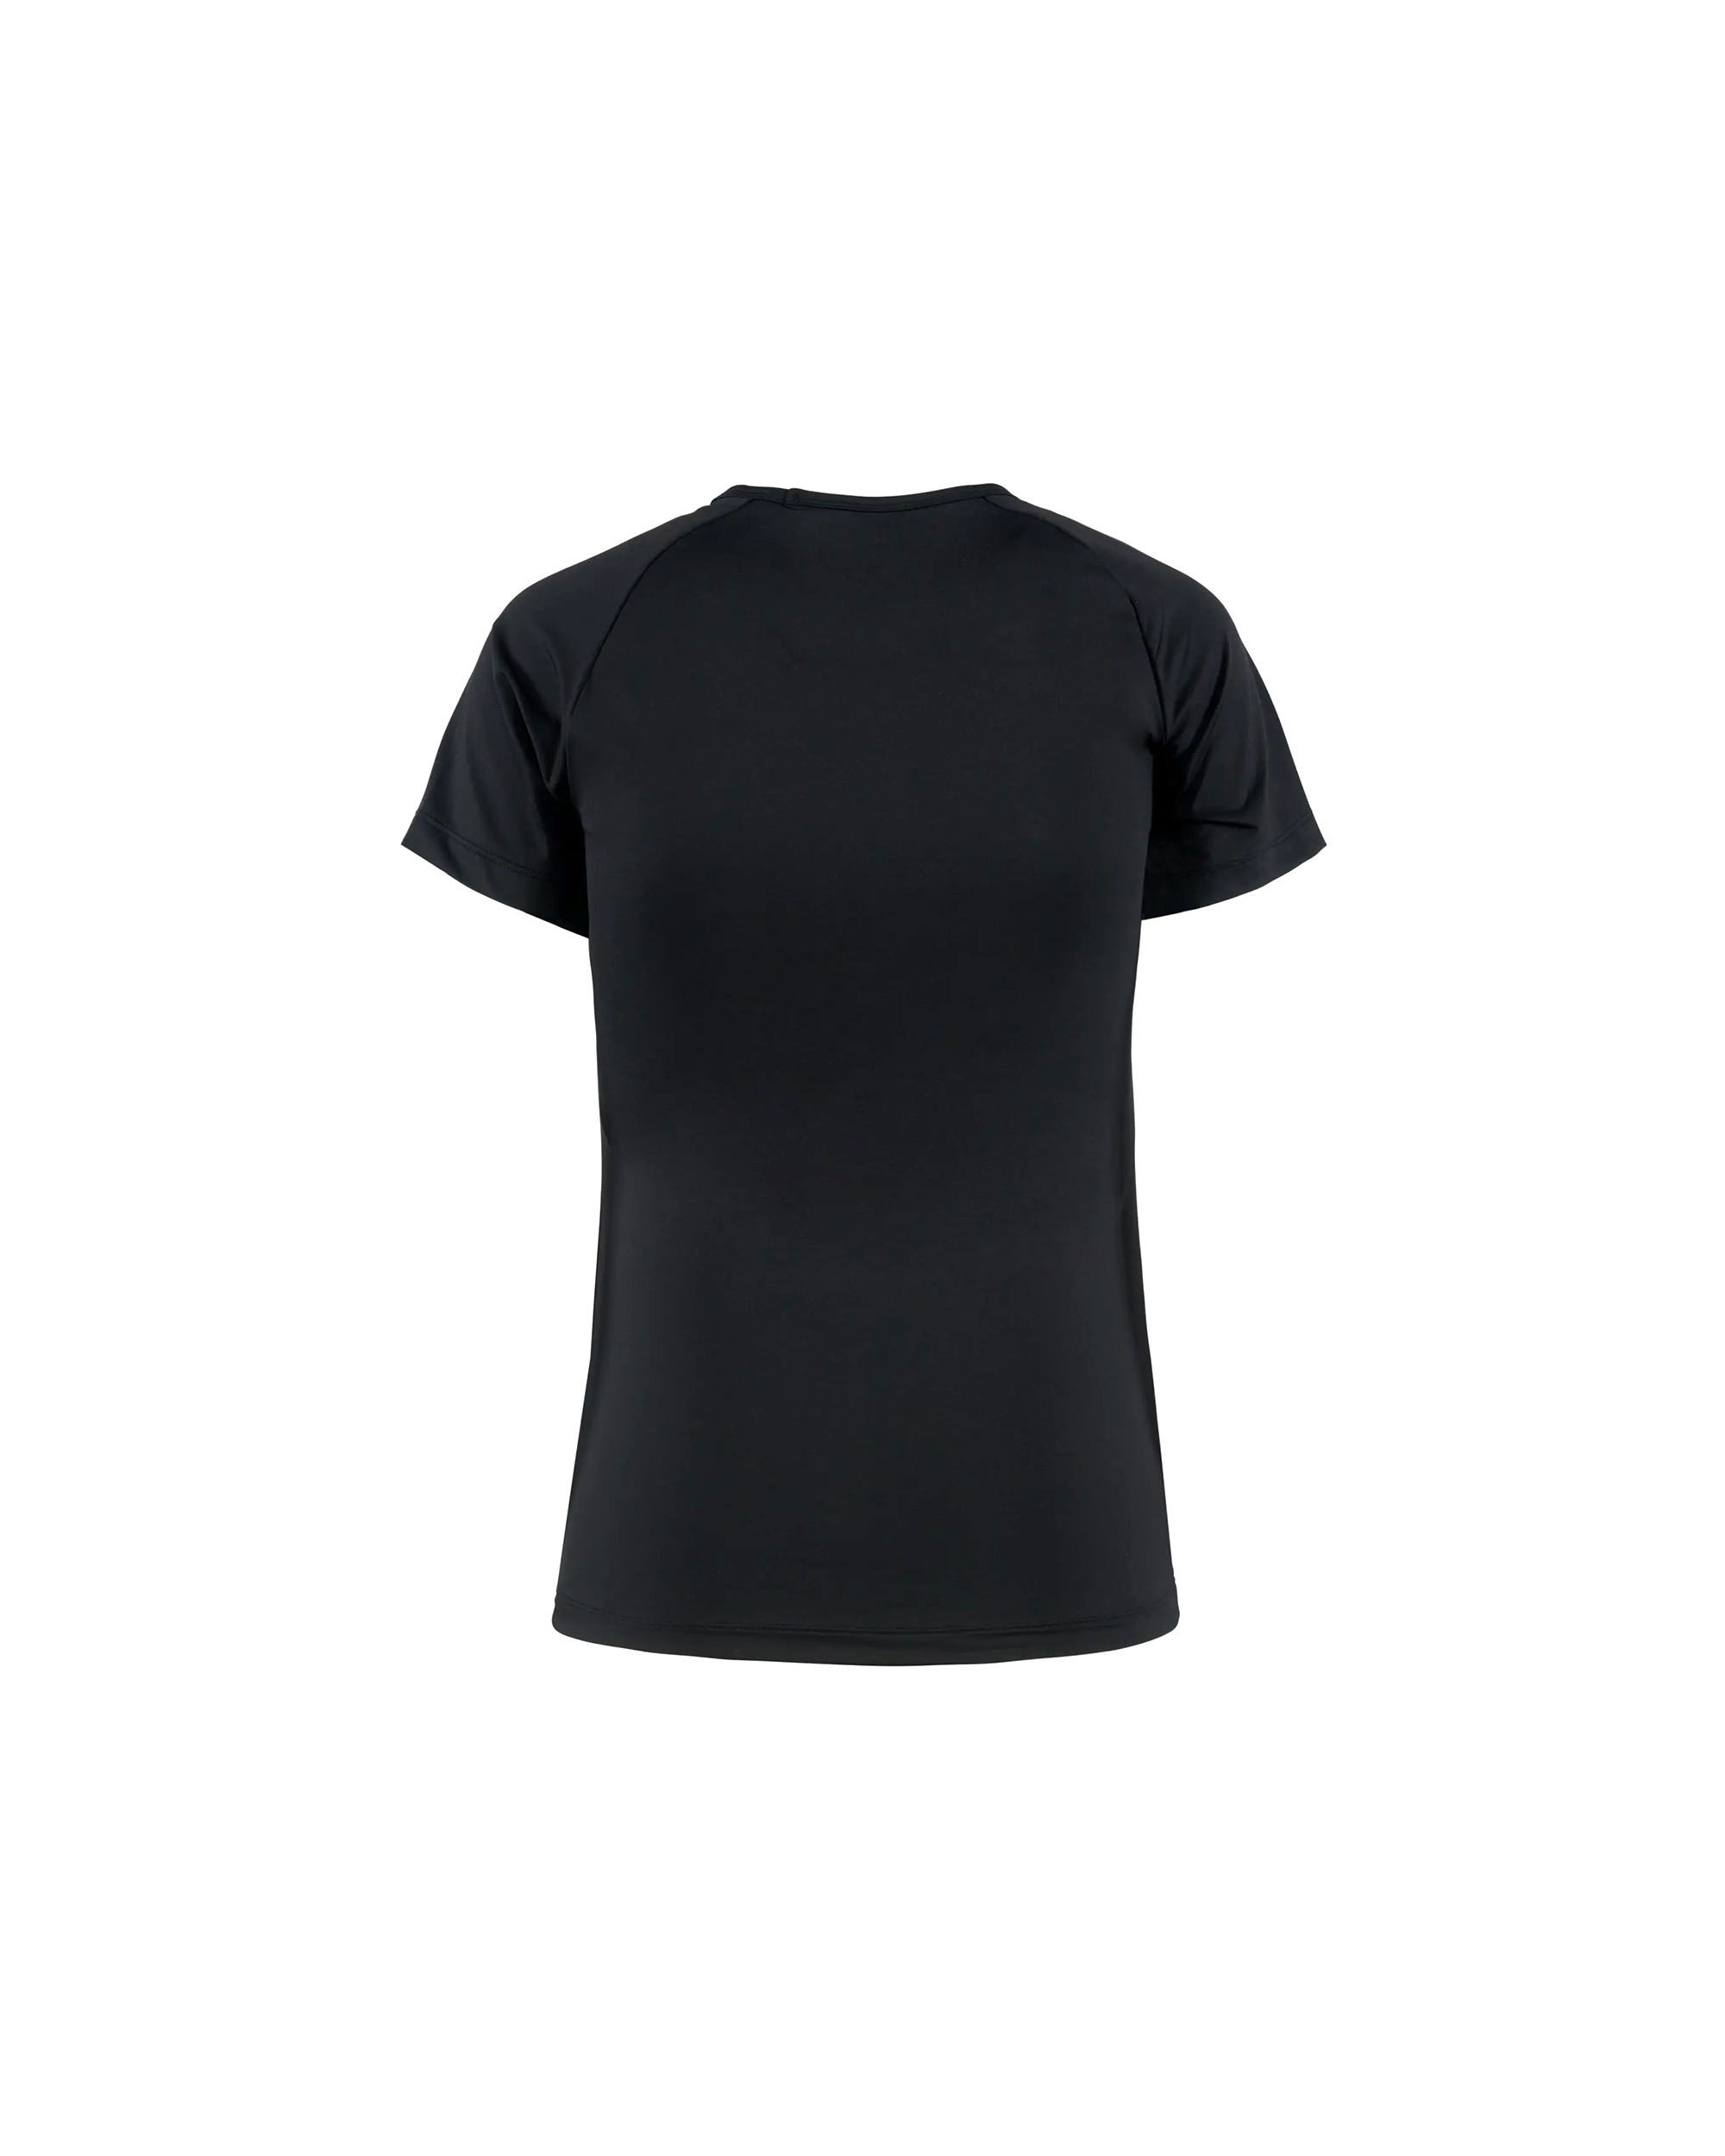 Fitted T-Shirt - Black